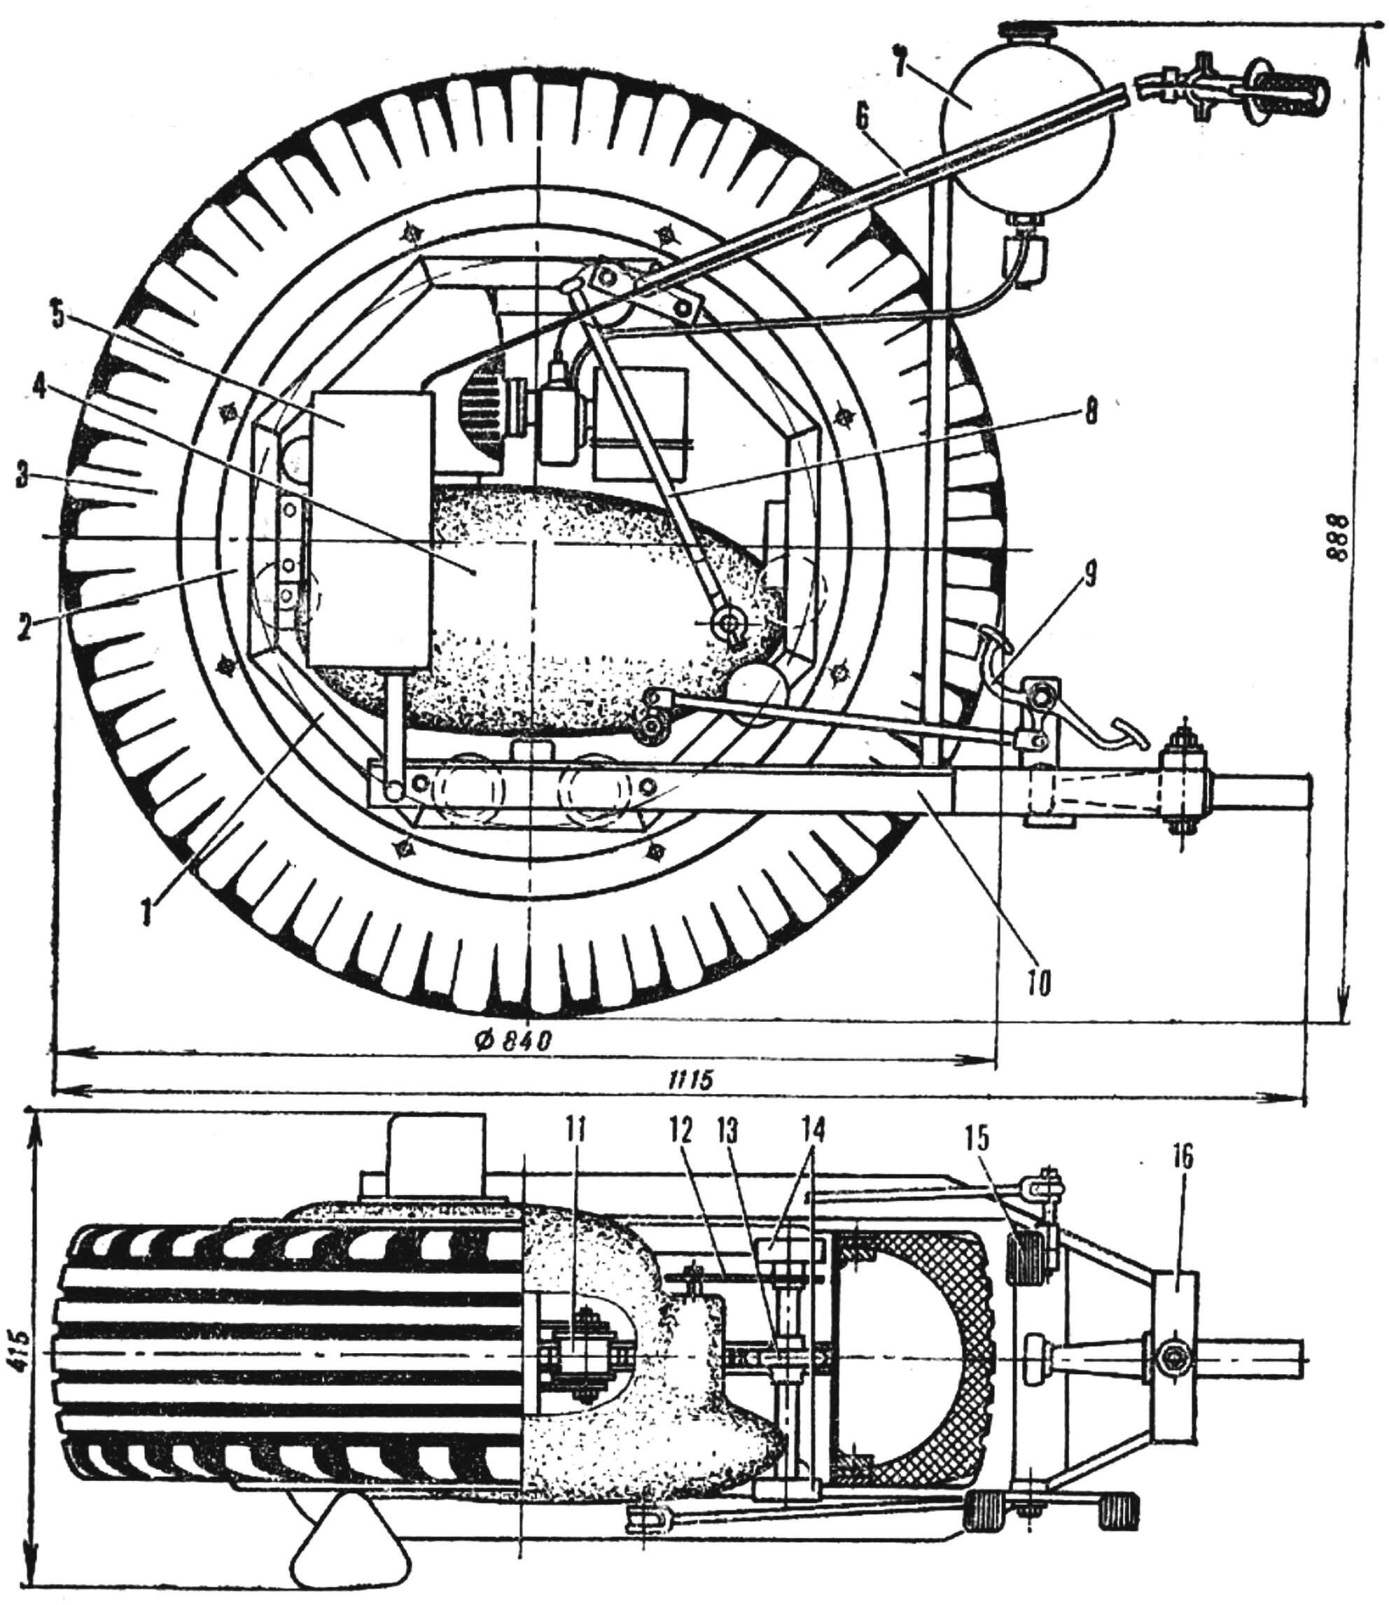 Fig, 1. The device is a one-wheeled tractor